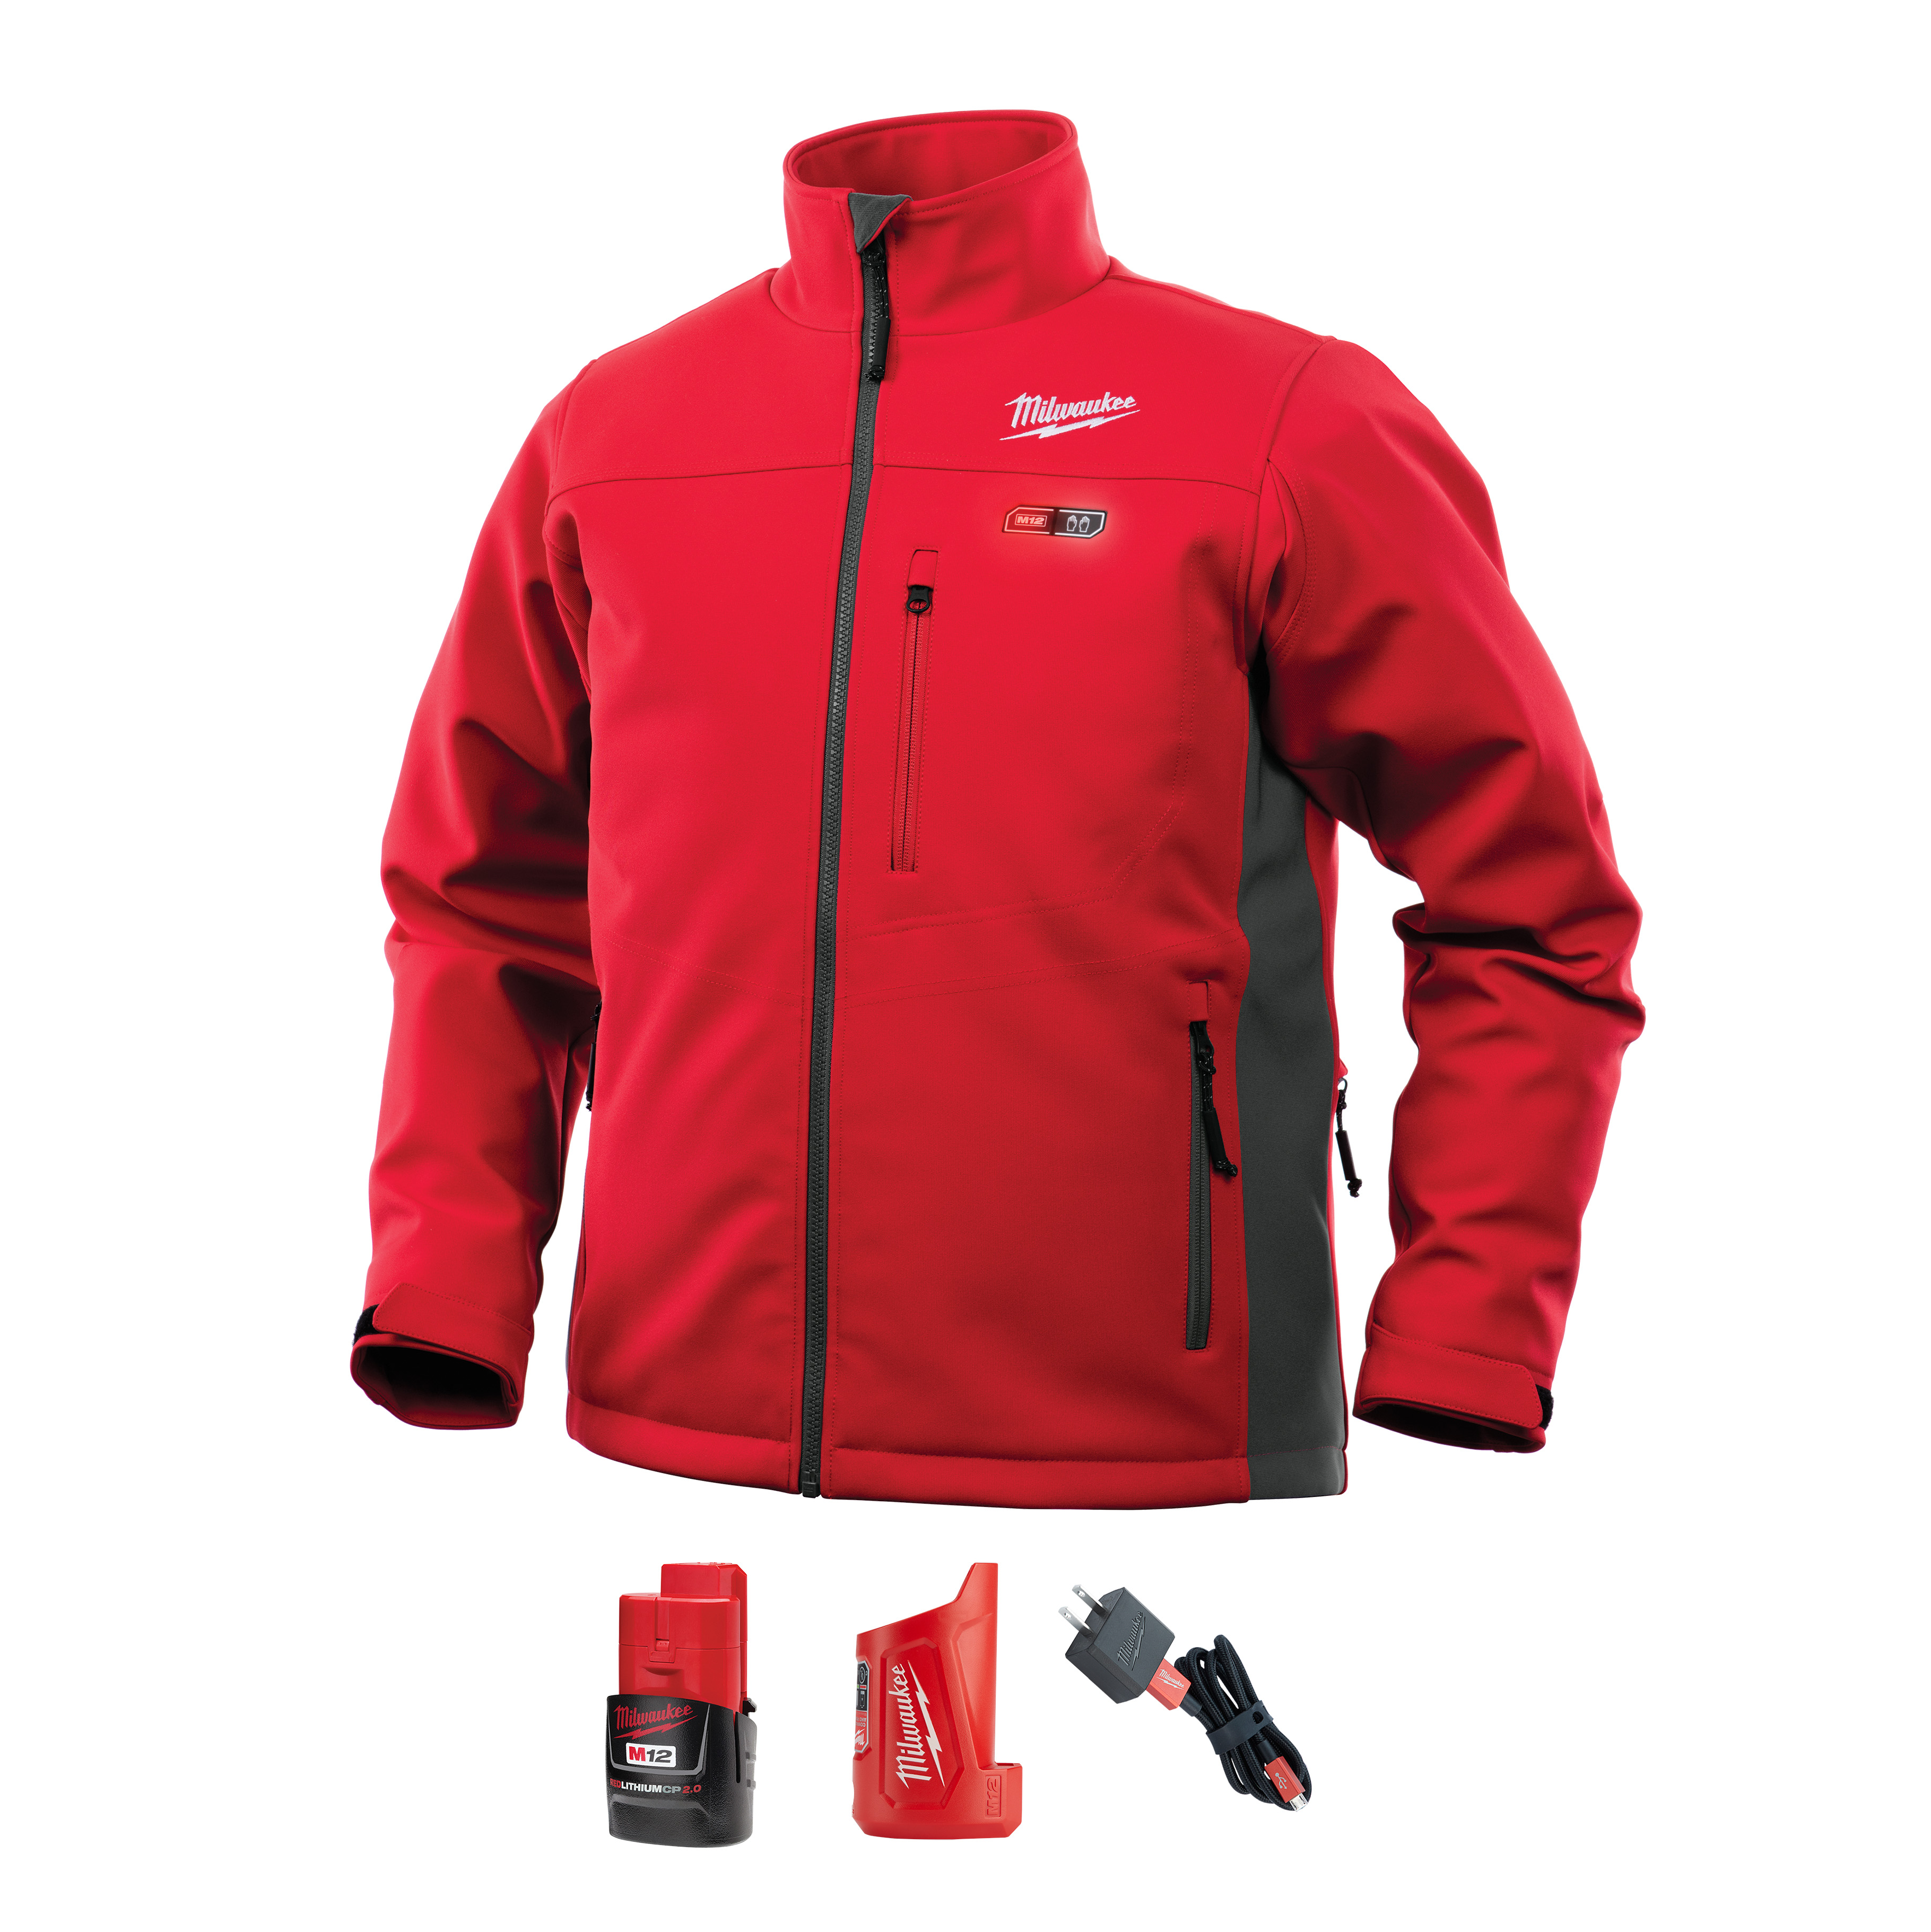 Powered by M12™ REDLITHIUM™ battery technology, Milwaukee® M12™ heated ToughShell™ jackets use carbon fiber heating elements to create and distribute heat to the chest, back, and front hand pockets. A one-touch LED controller allows users to select from three heat settings, delivering ideal heat for any environment. The new quick-heat function allows users to feel heat 3X faster than previous jackets and market competitors. For use in abrasive environments, ToughShell™ stretch polyester delivers 5X longer life than previous QuietShell jackets, and provides wind and water resistance to survive the elements. 22293